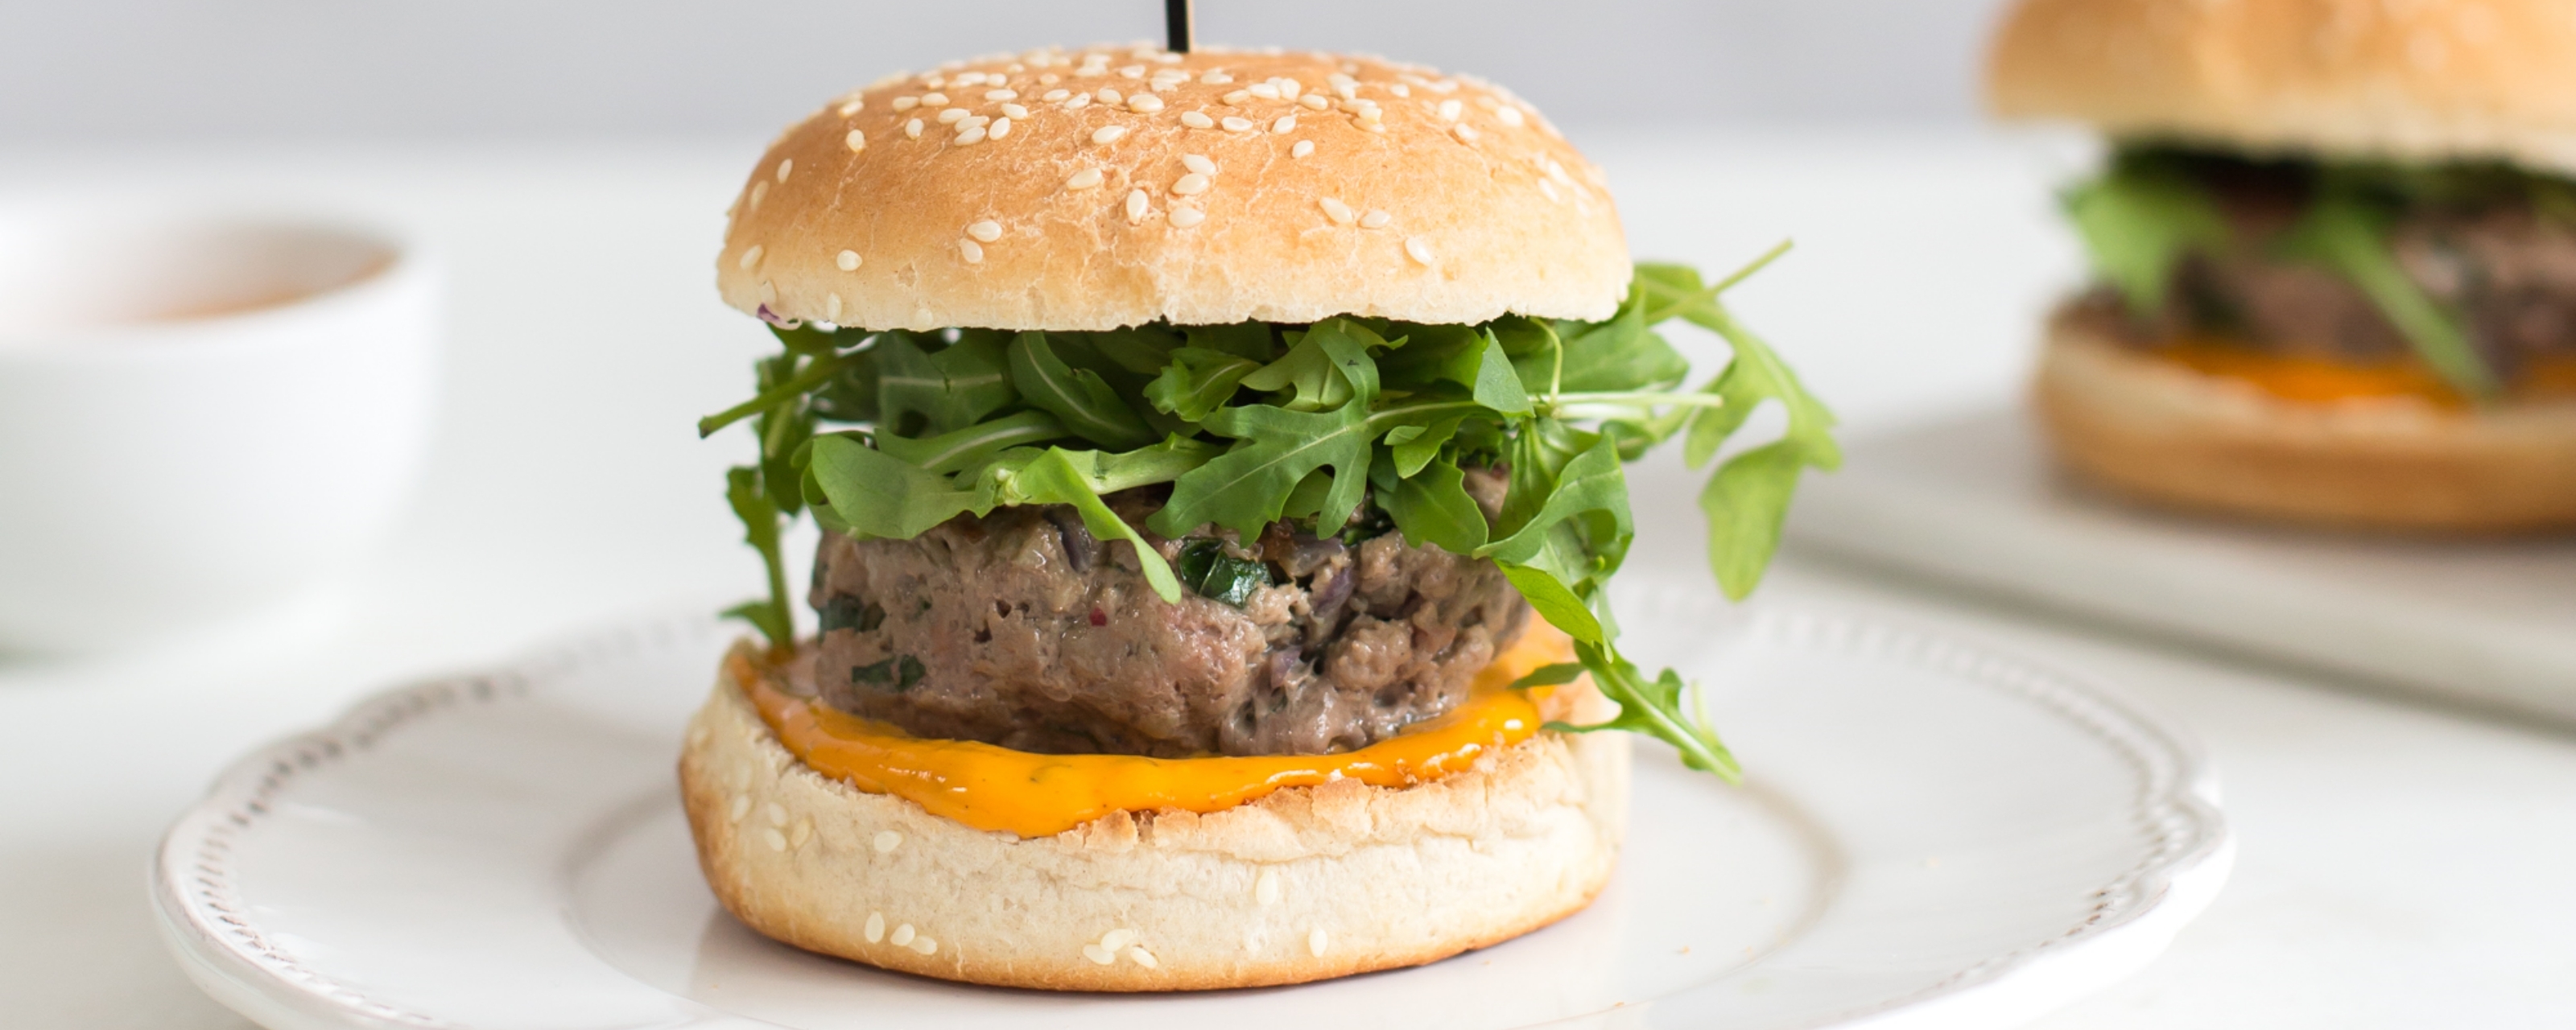 Homemade burger with cheese and rucola